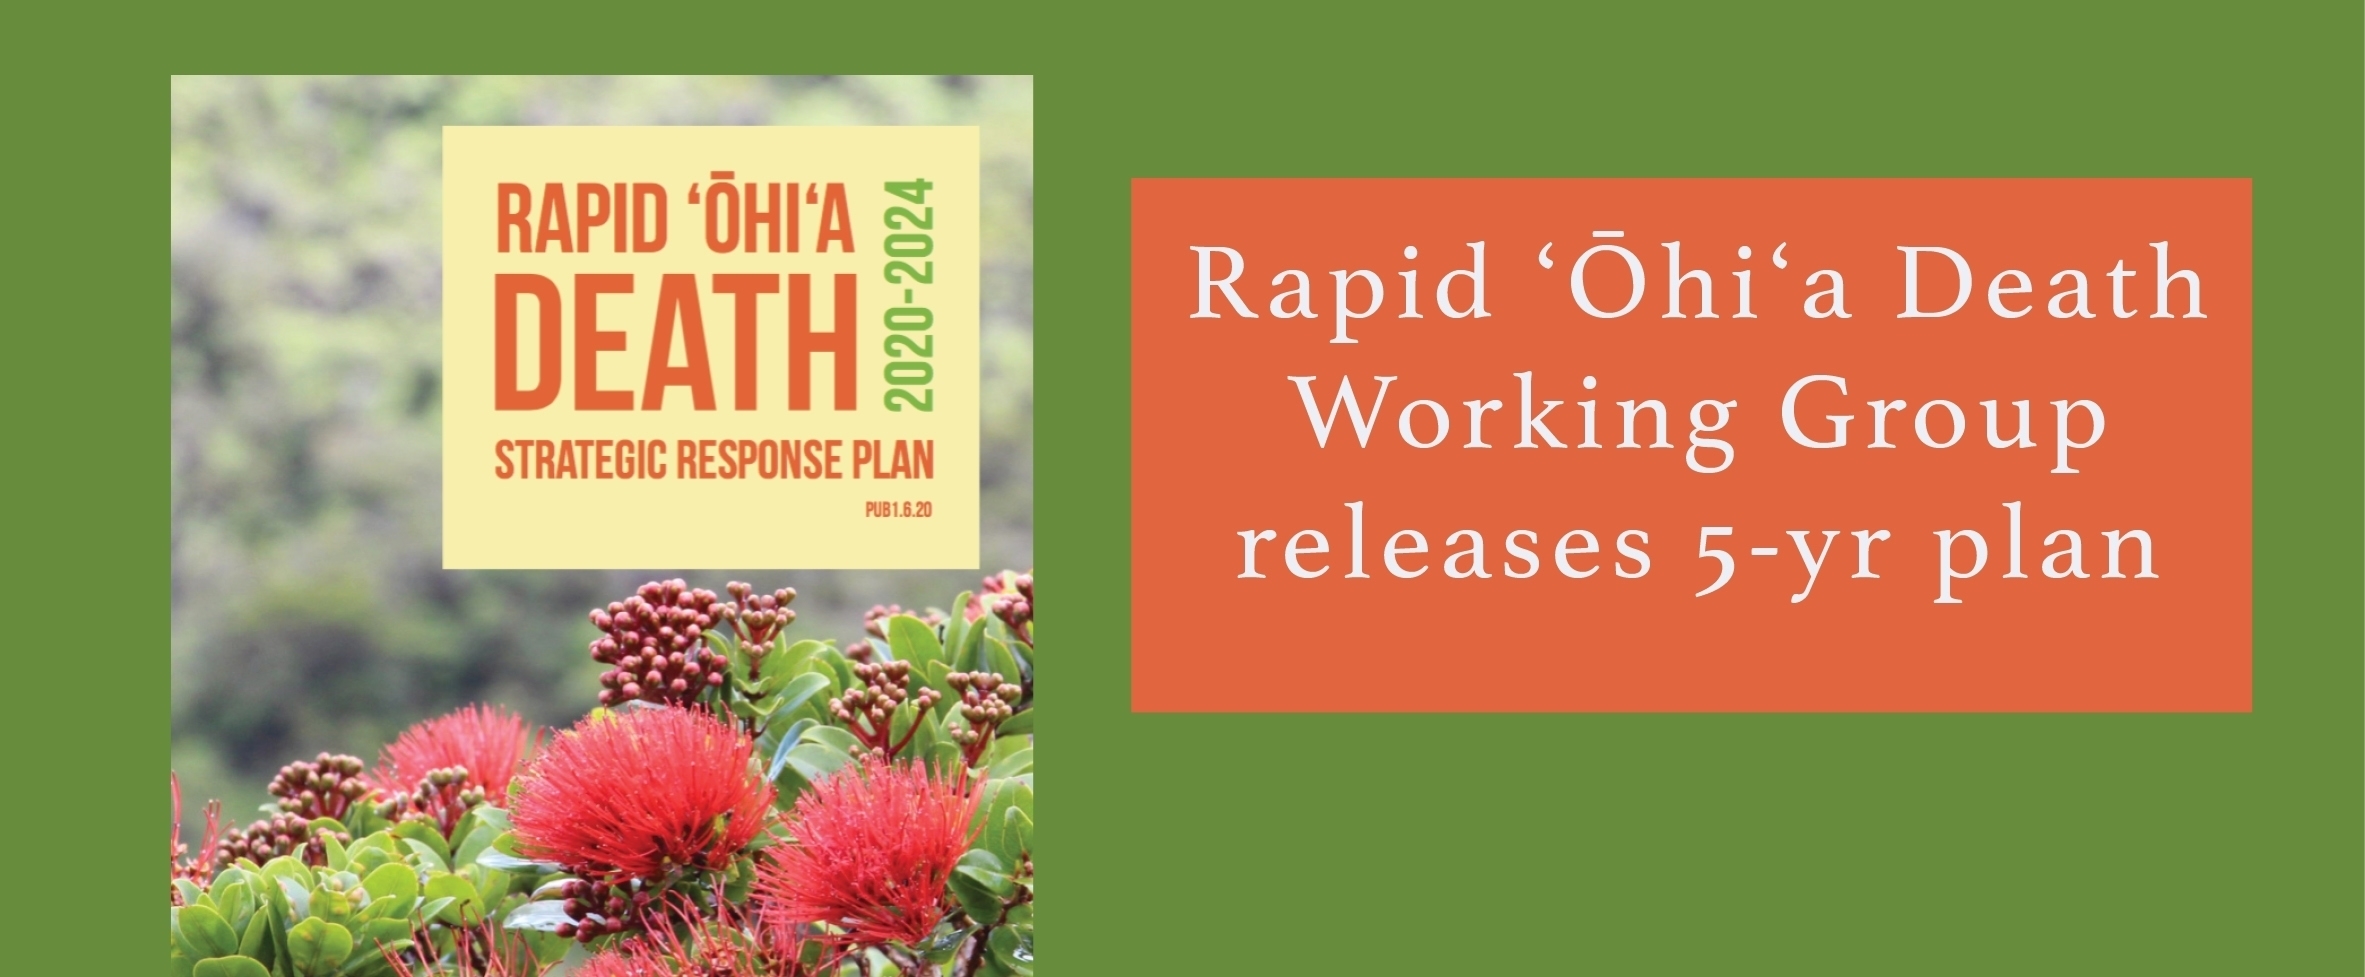 The Rapid Ohia Death Working Group, led by the Department of Land & Natural Resources, Division of Forestry and Wildlife among others, has released its second strategic response plan covering work to address ROD from 2020 to 2024.